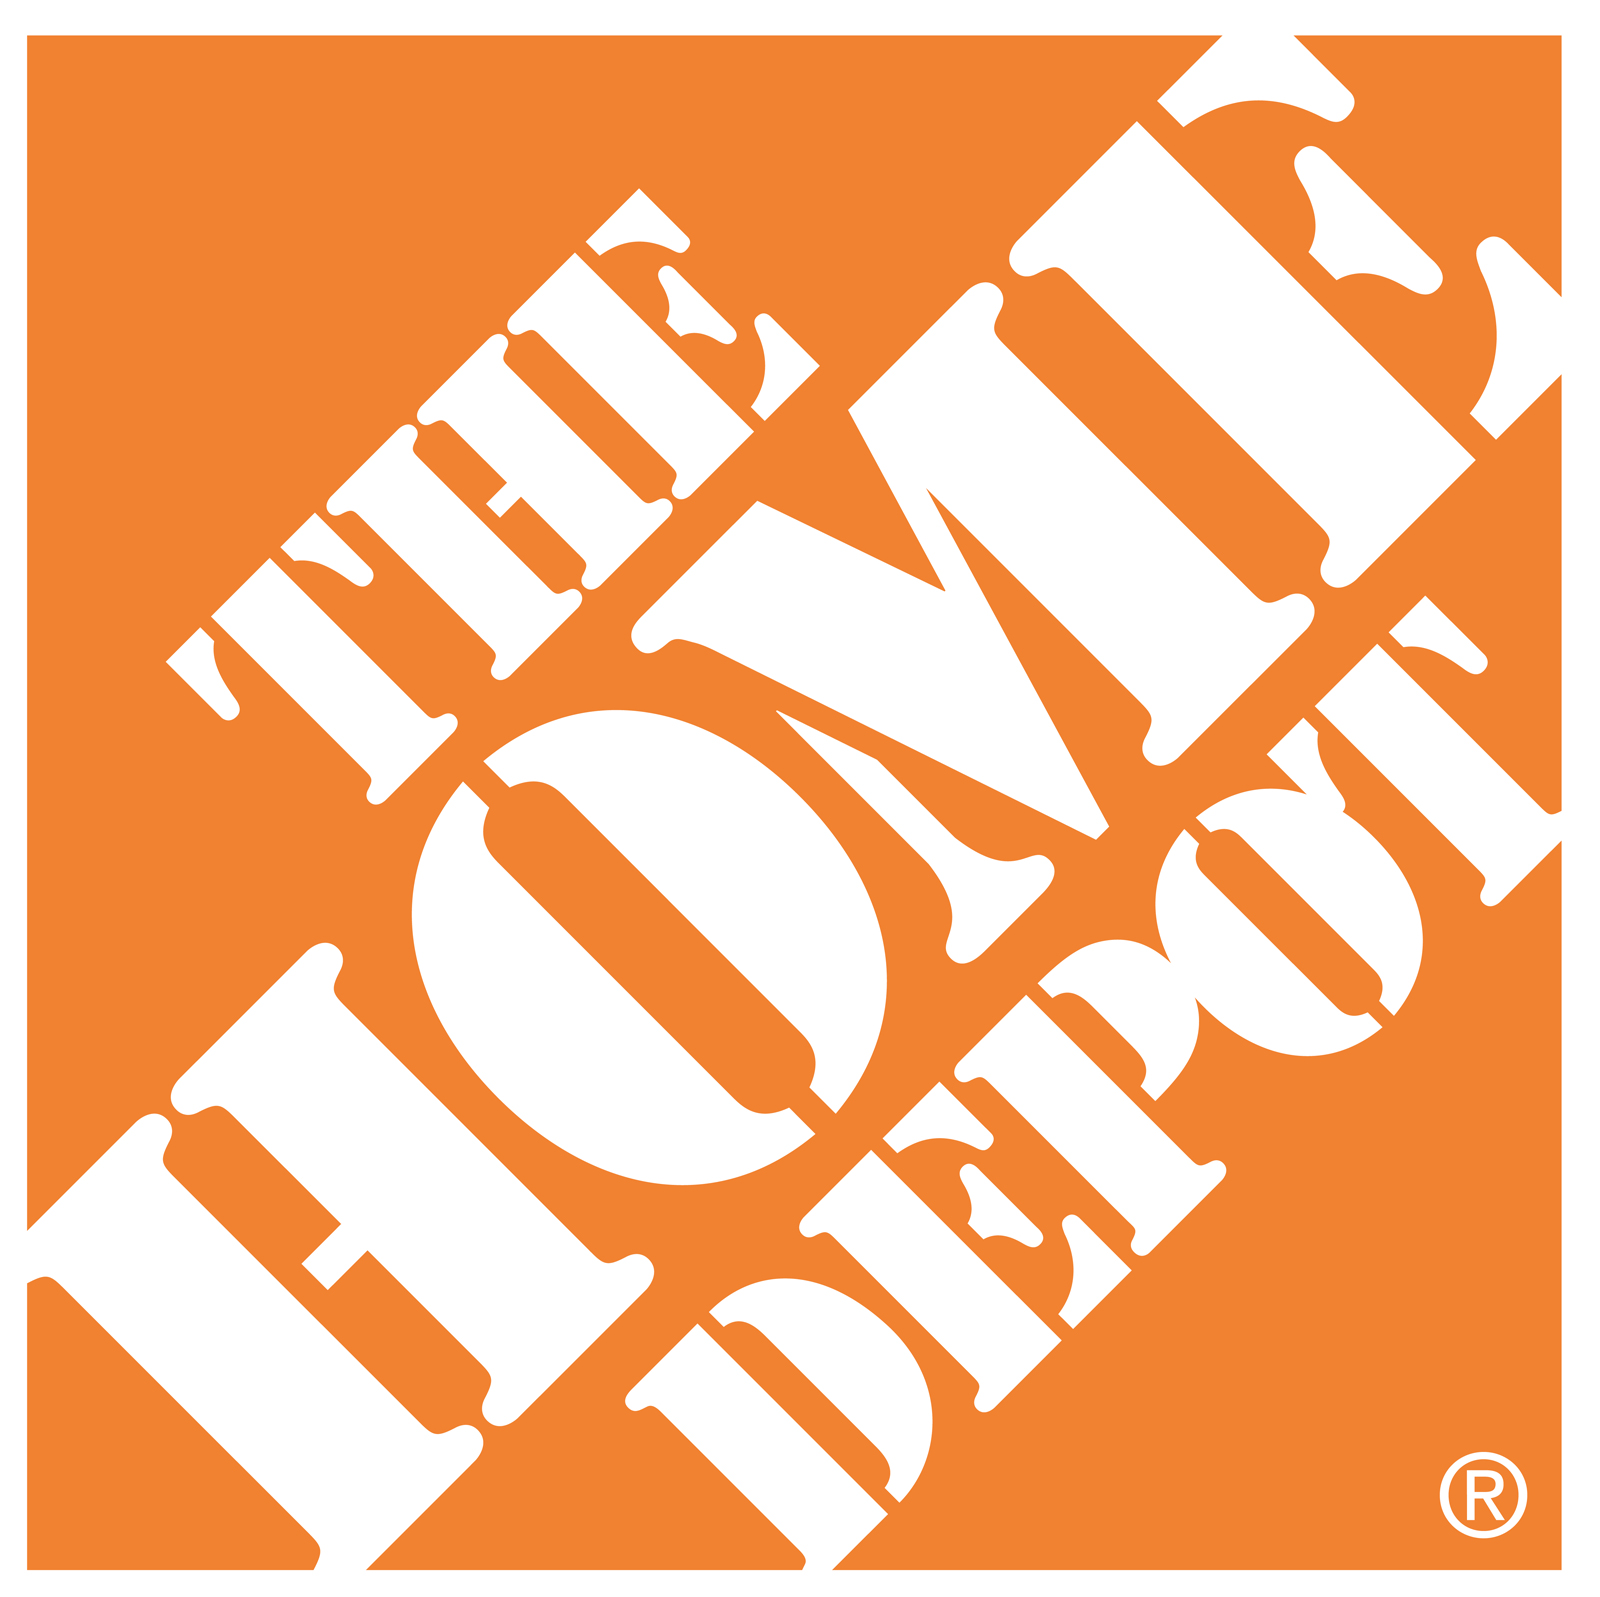 $100 Home Depot Gift Card Giveaway!